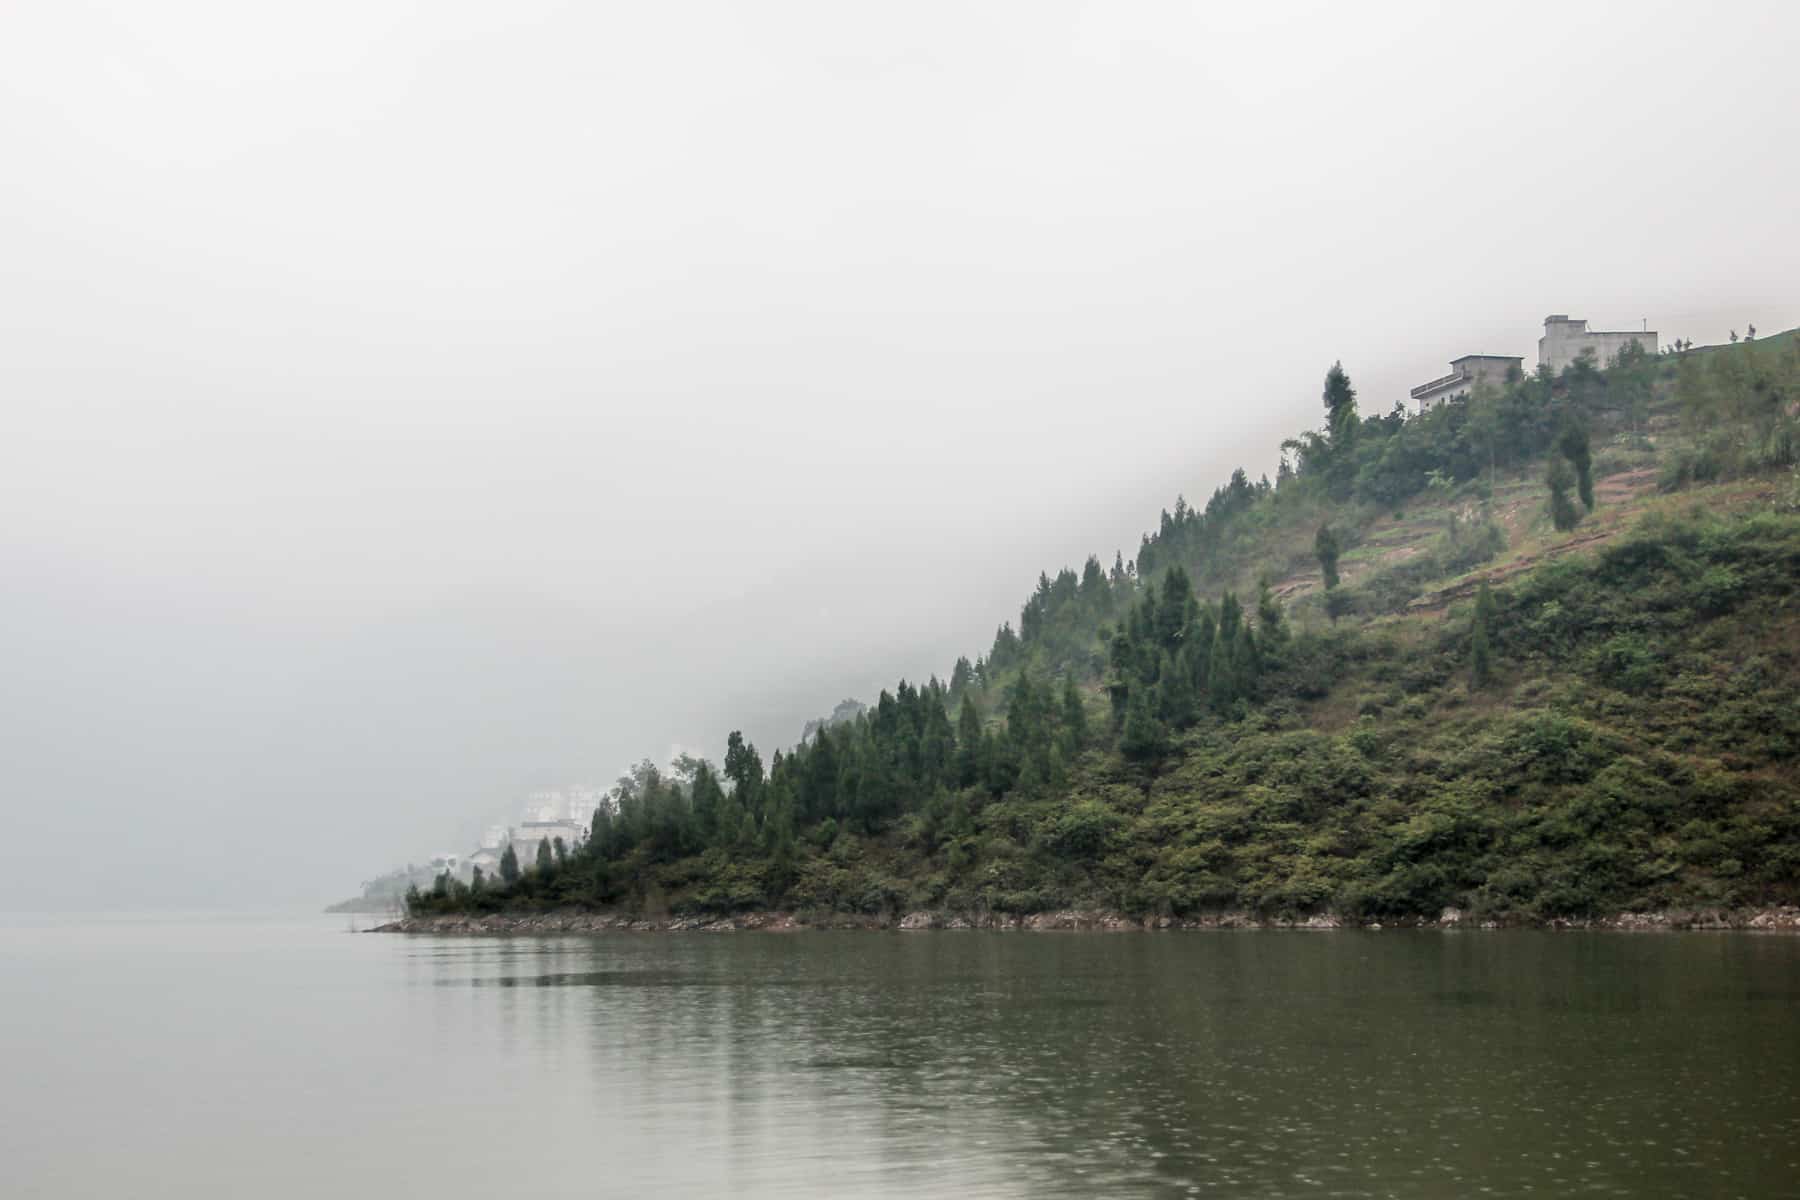 The end of a house-topped, tiny island sits pointedly in the Yangtze River, shrouded in fog